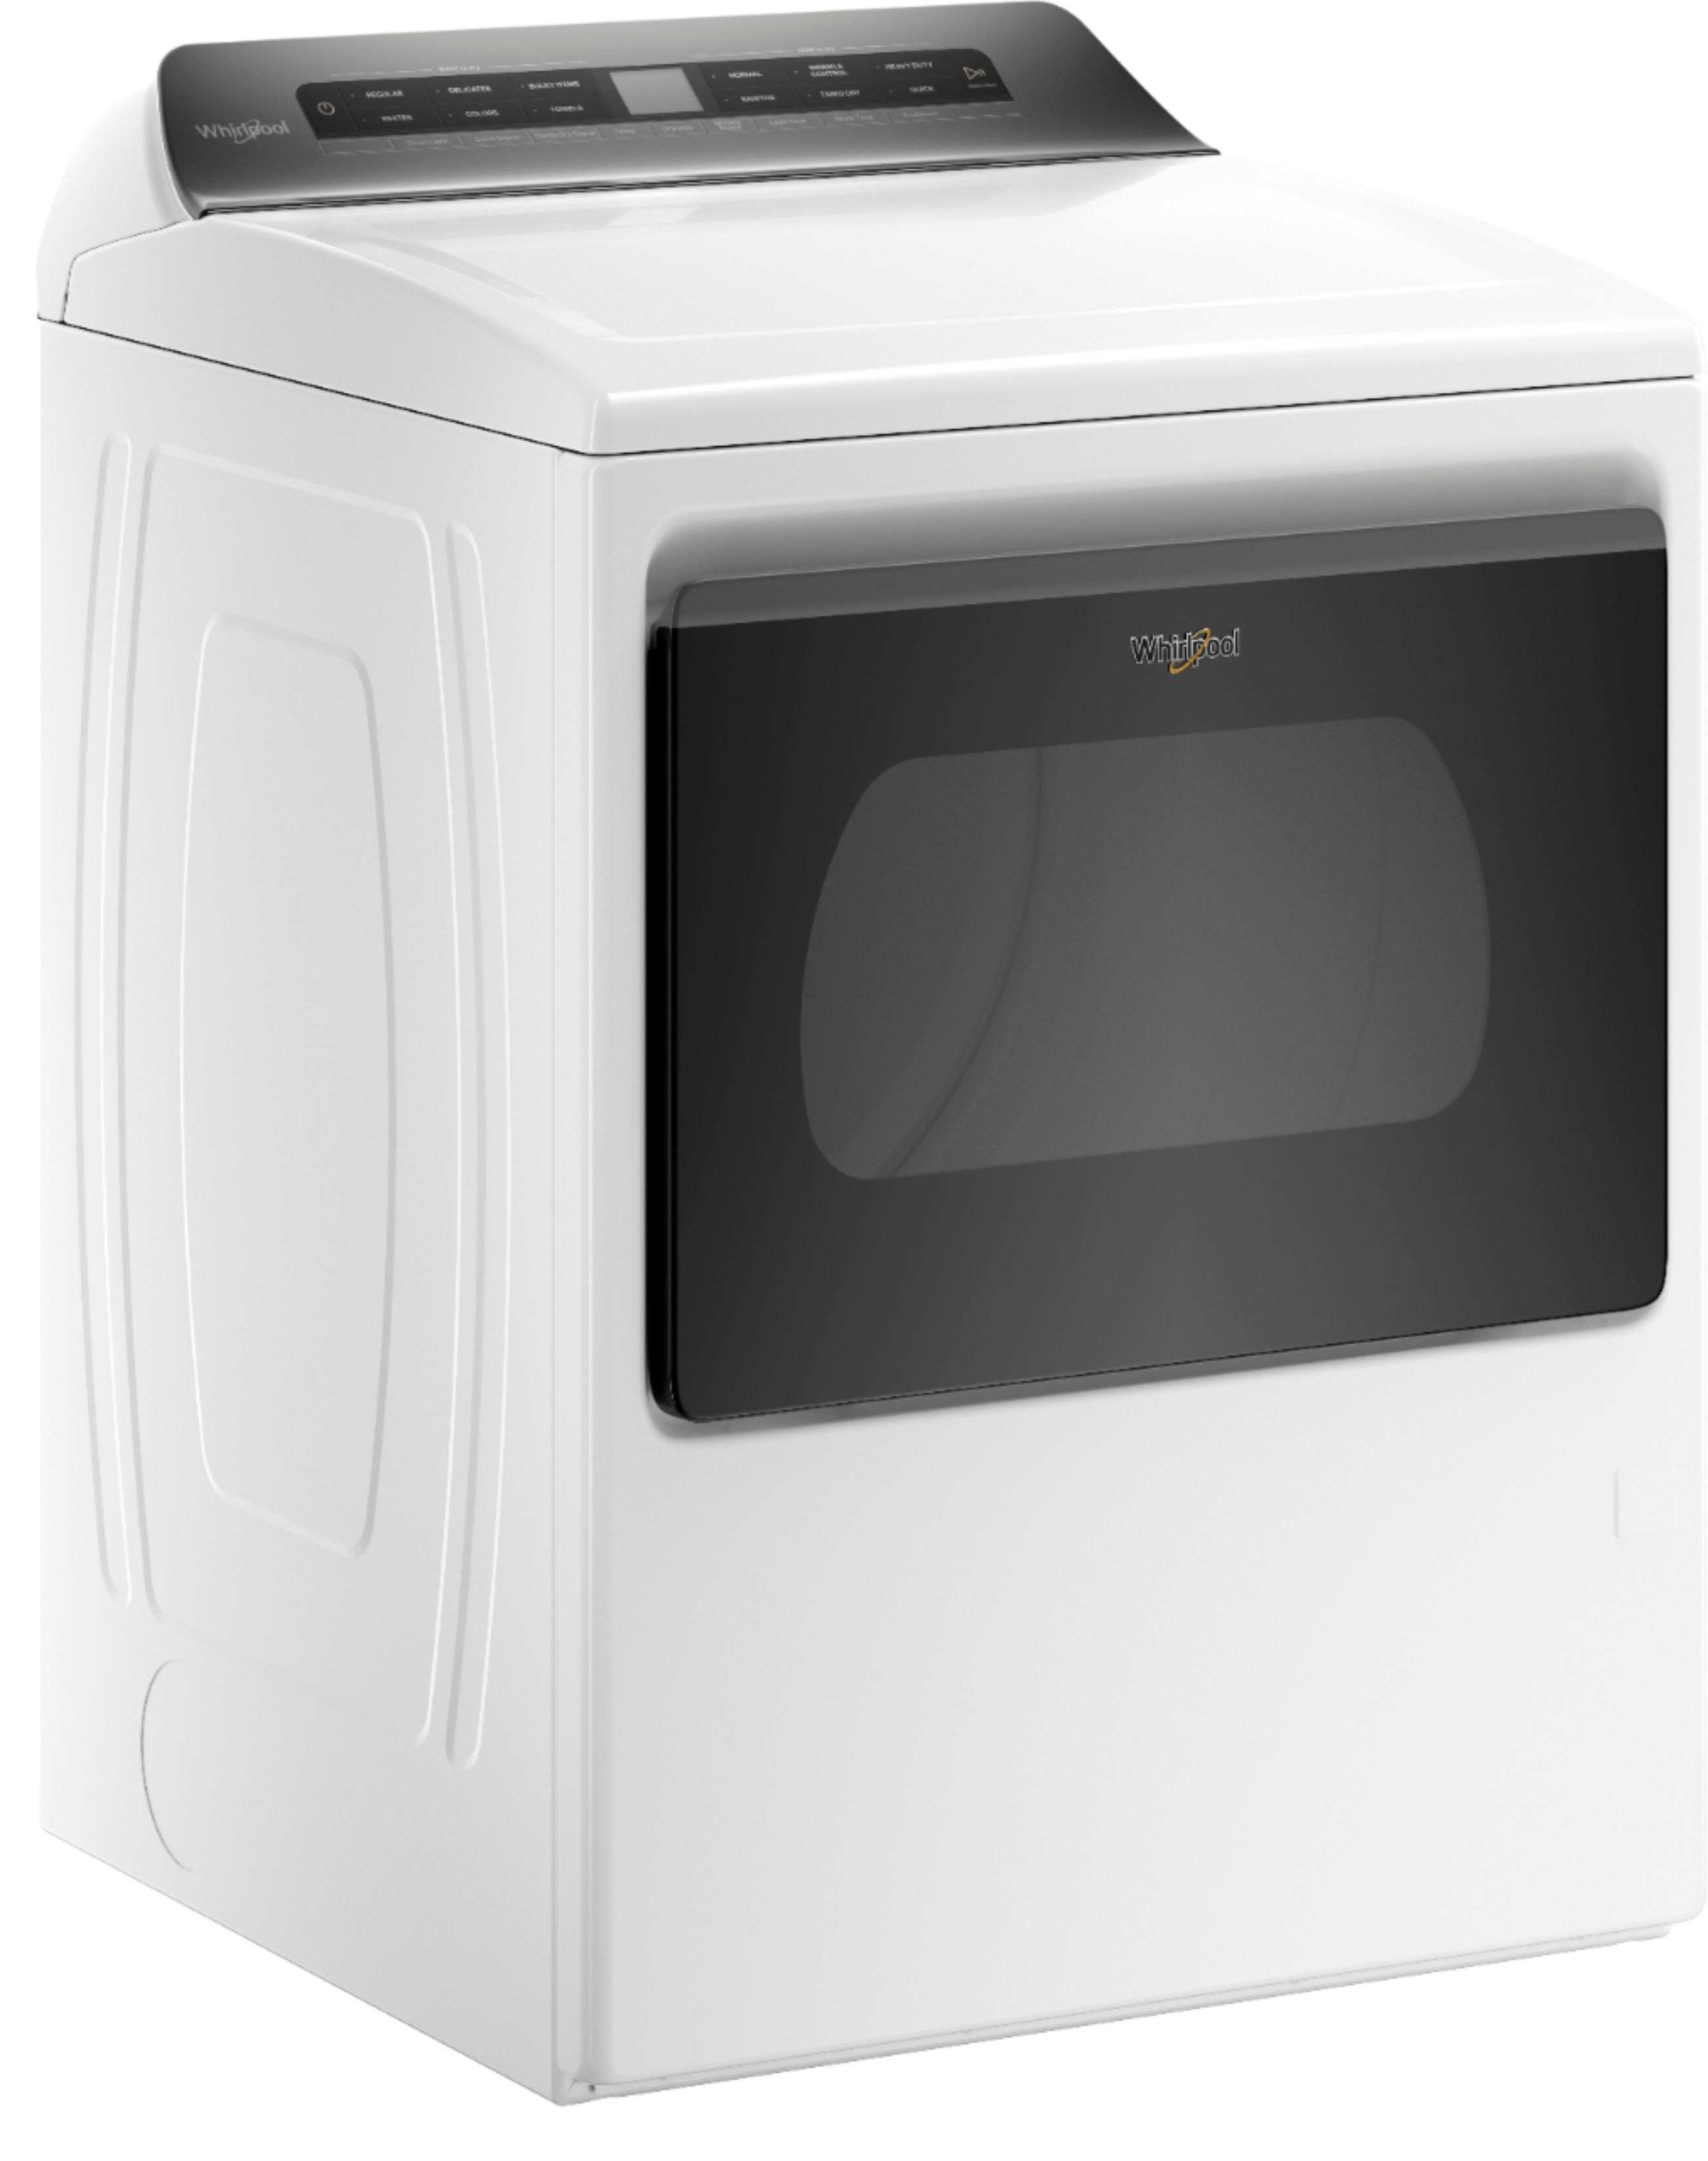 Angle View: Whirlpool - 7.4 Cu. Ft. Gas Dryer with AccuDry Sensor Drying System - White